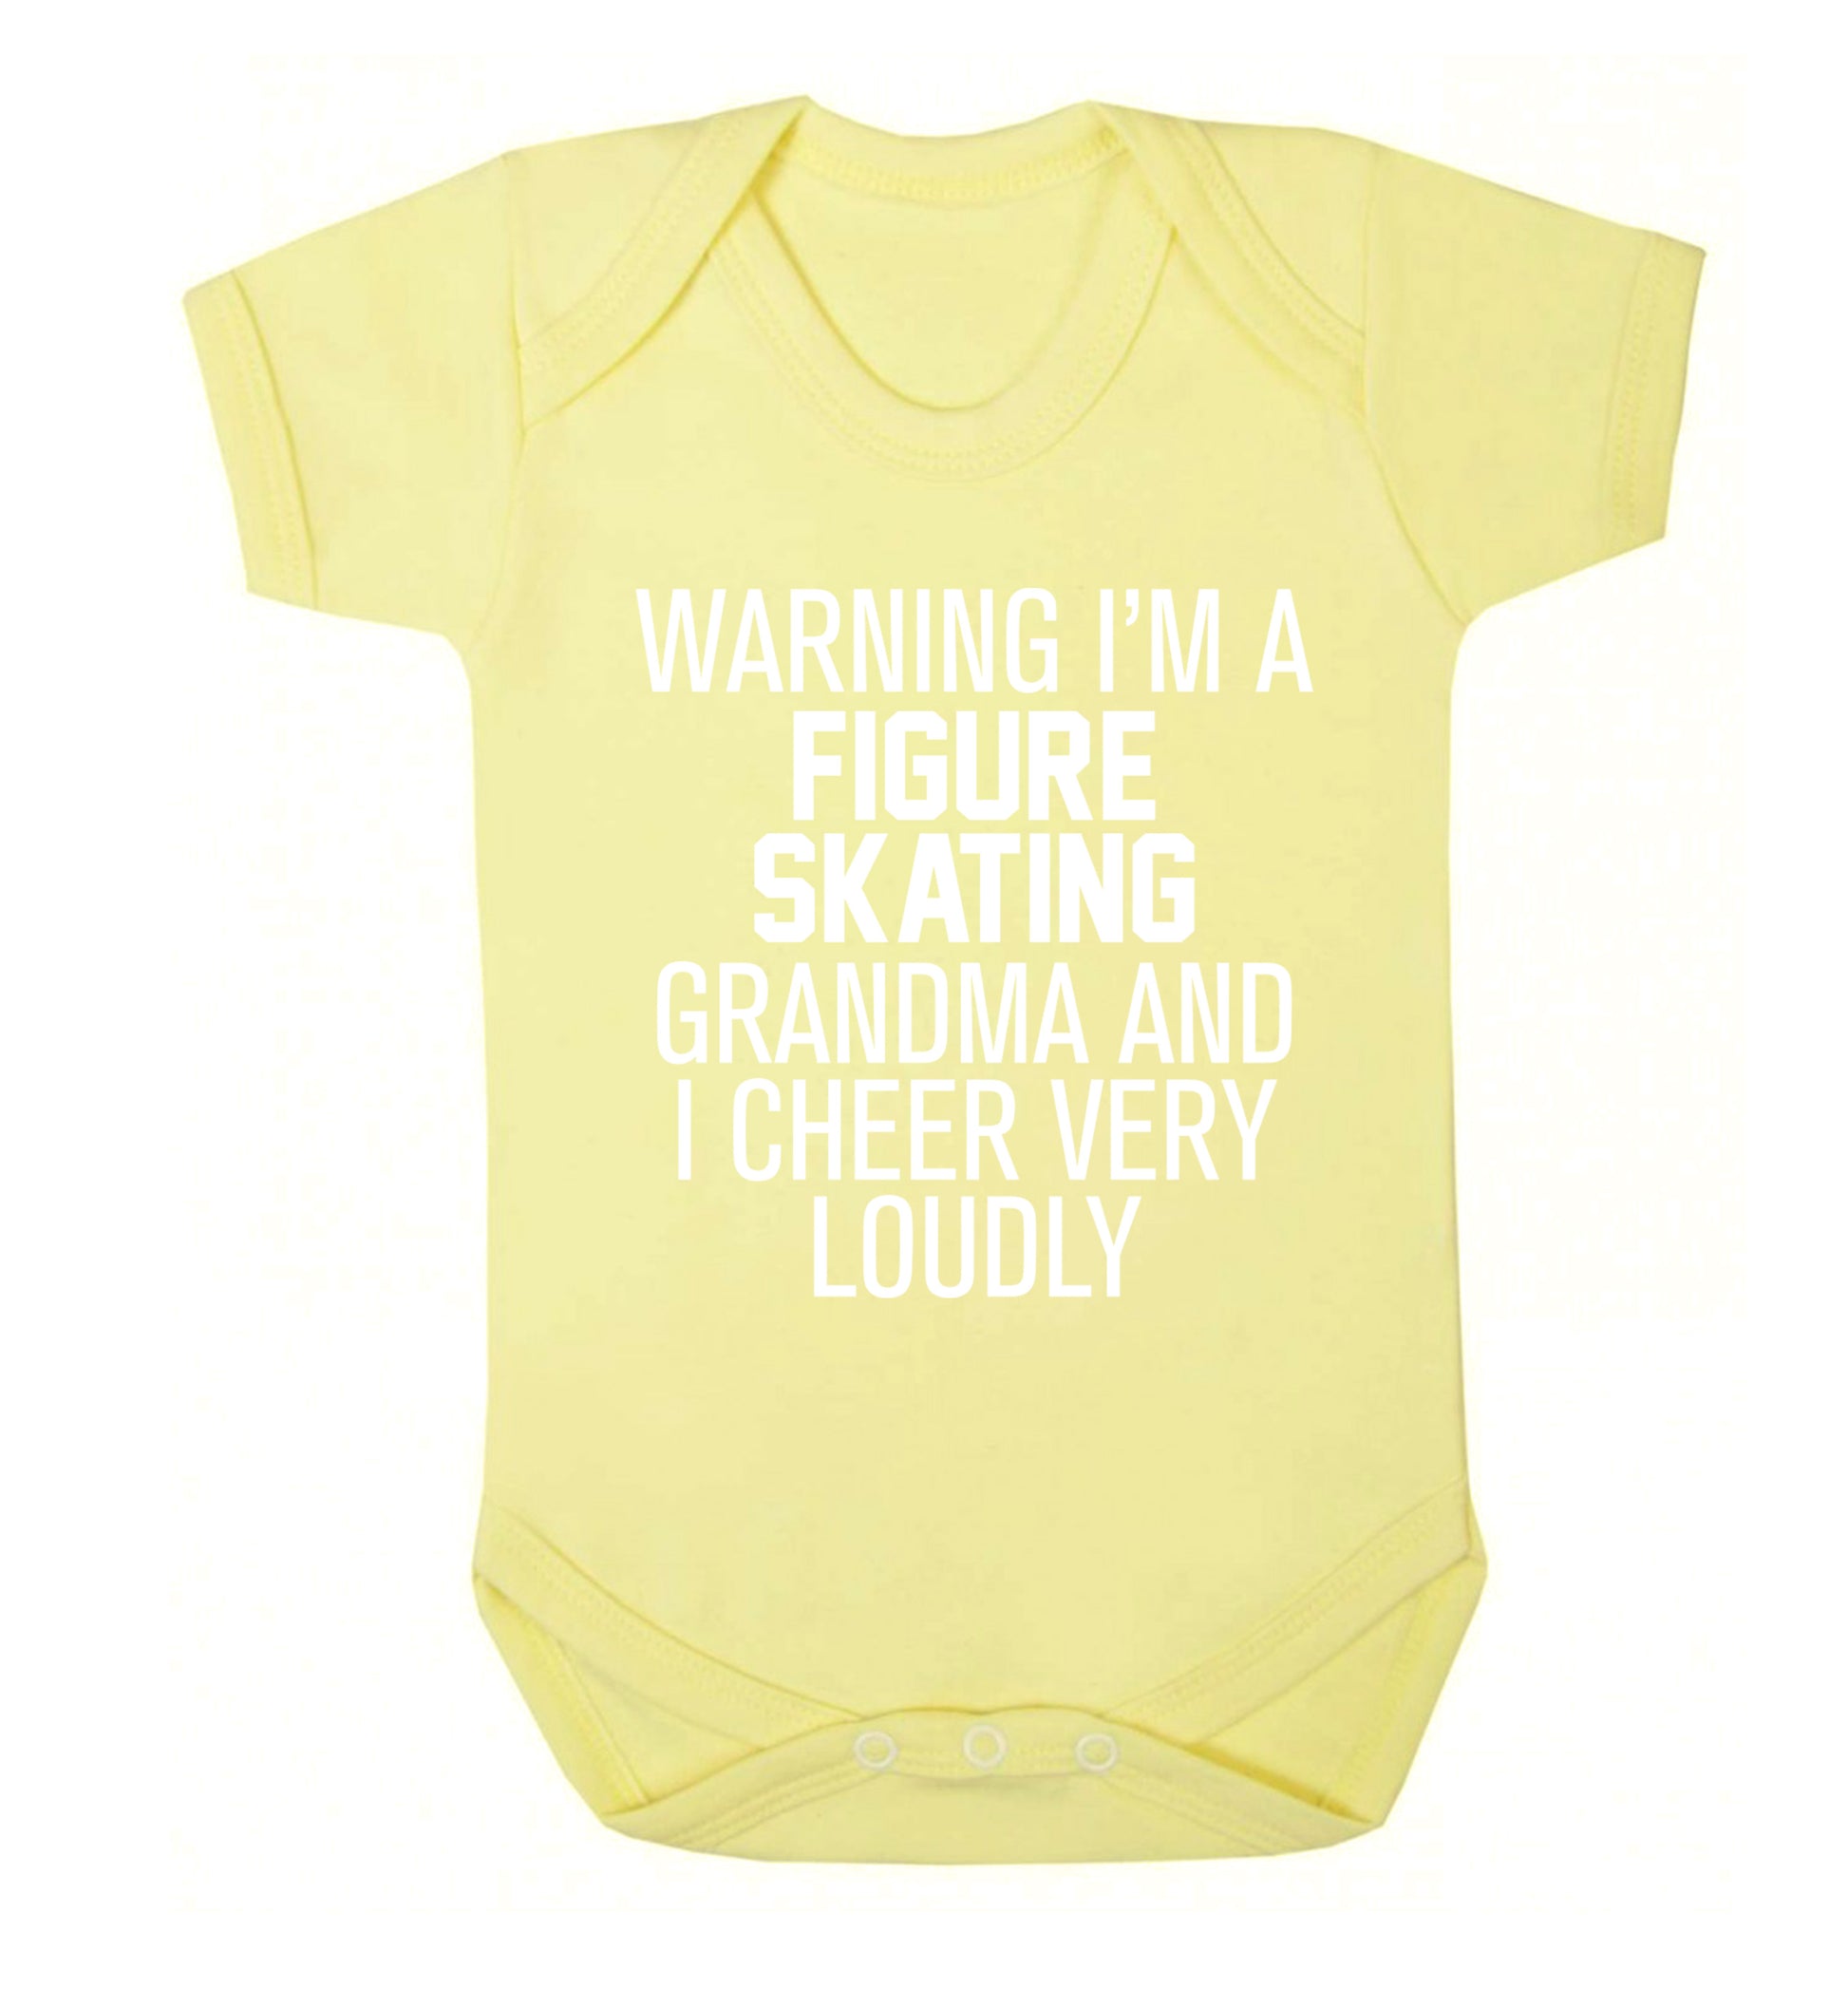 Warning I'm a figure skating grandma and I cheer very loudly Baby Vest pale yellow 18-24 months